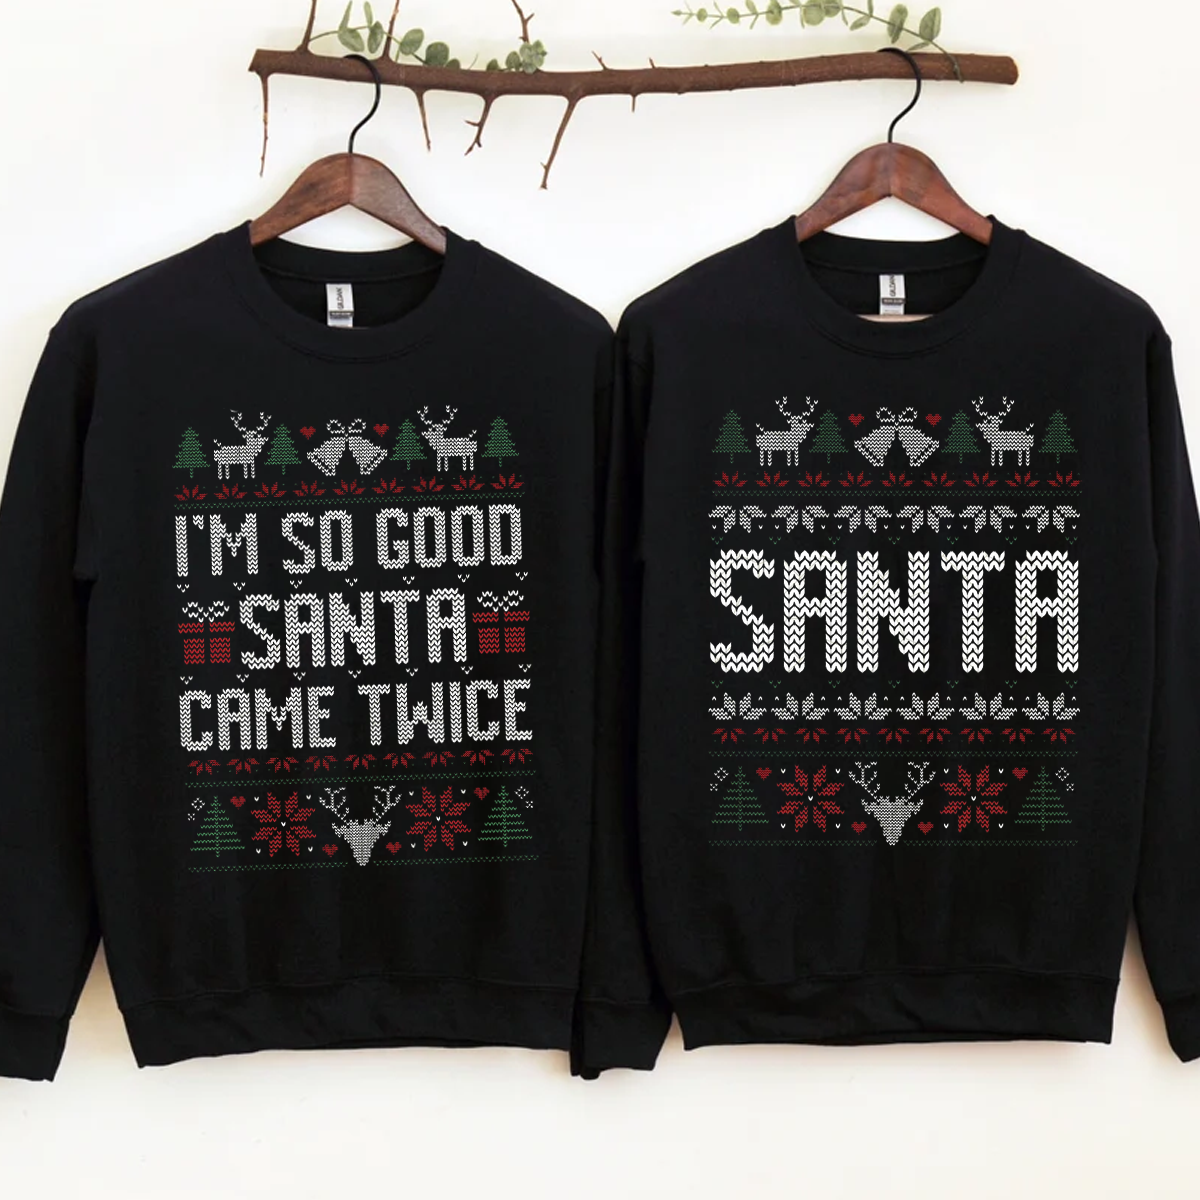 I'm So Good Santa Came Twice - Couple Funny Matching Christmas Jumper Sweater